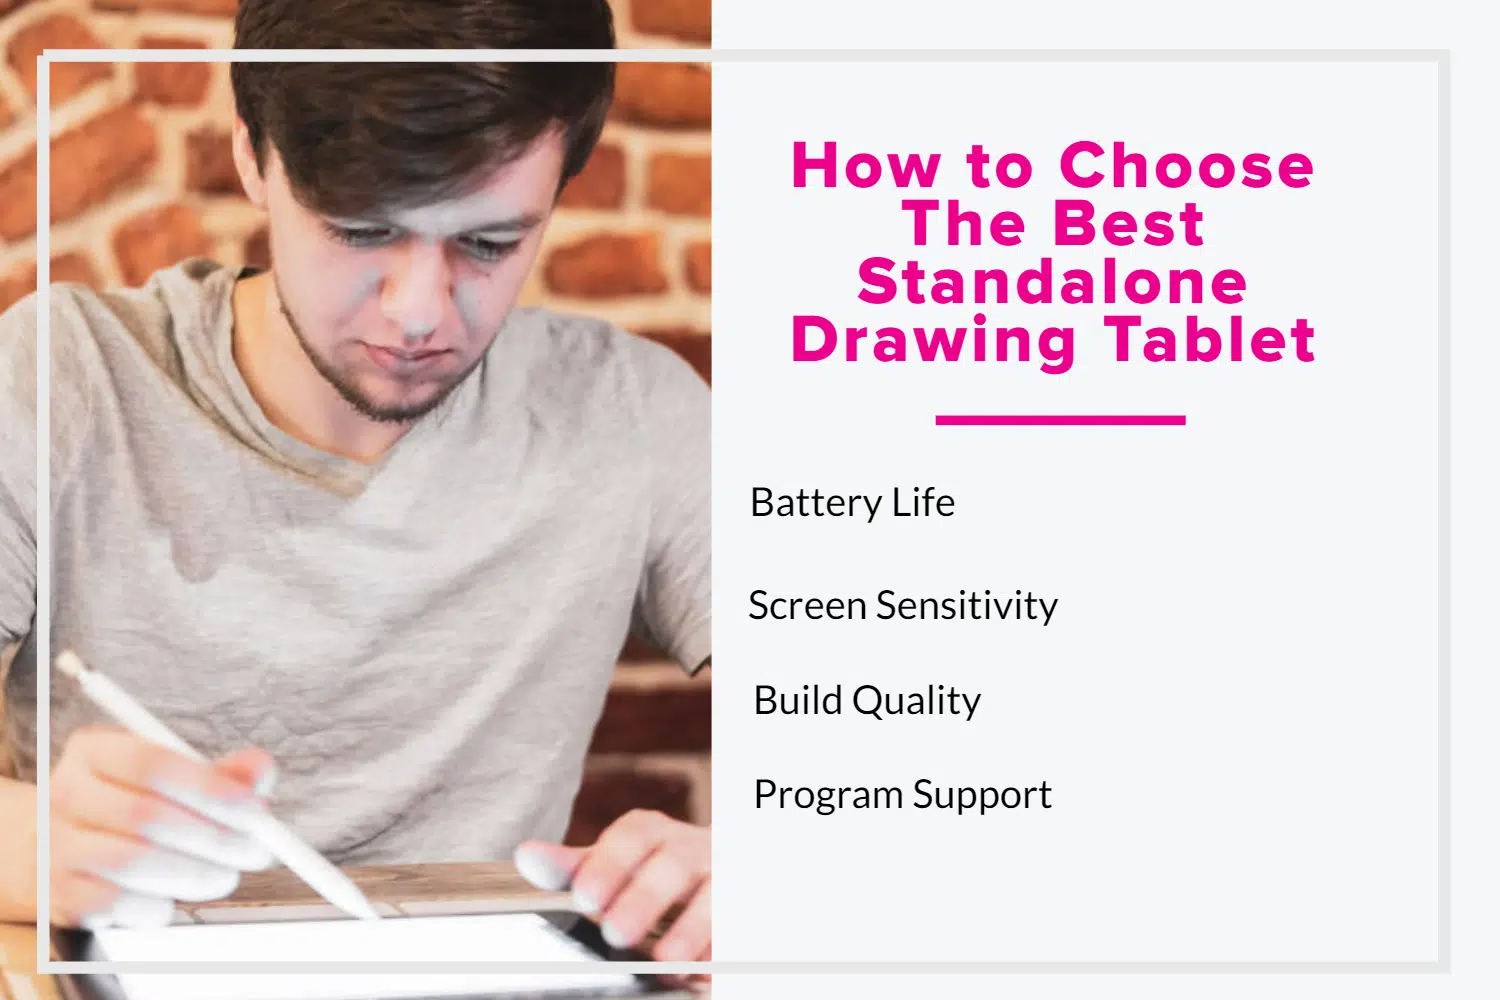 How to Choose The Best Standalone Drawing Tablet